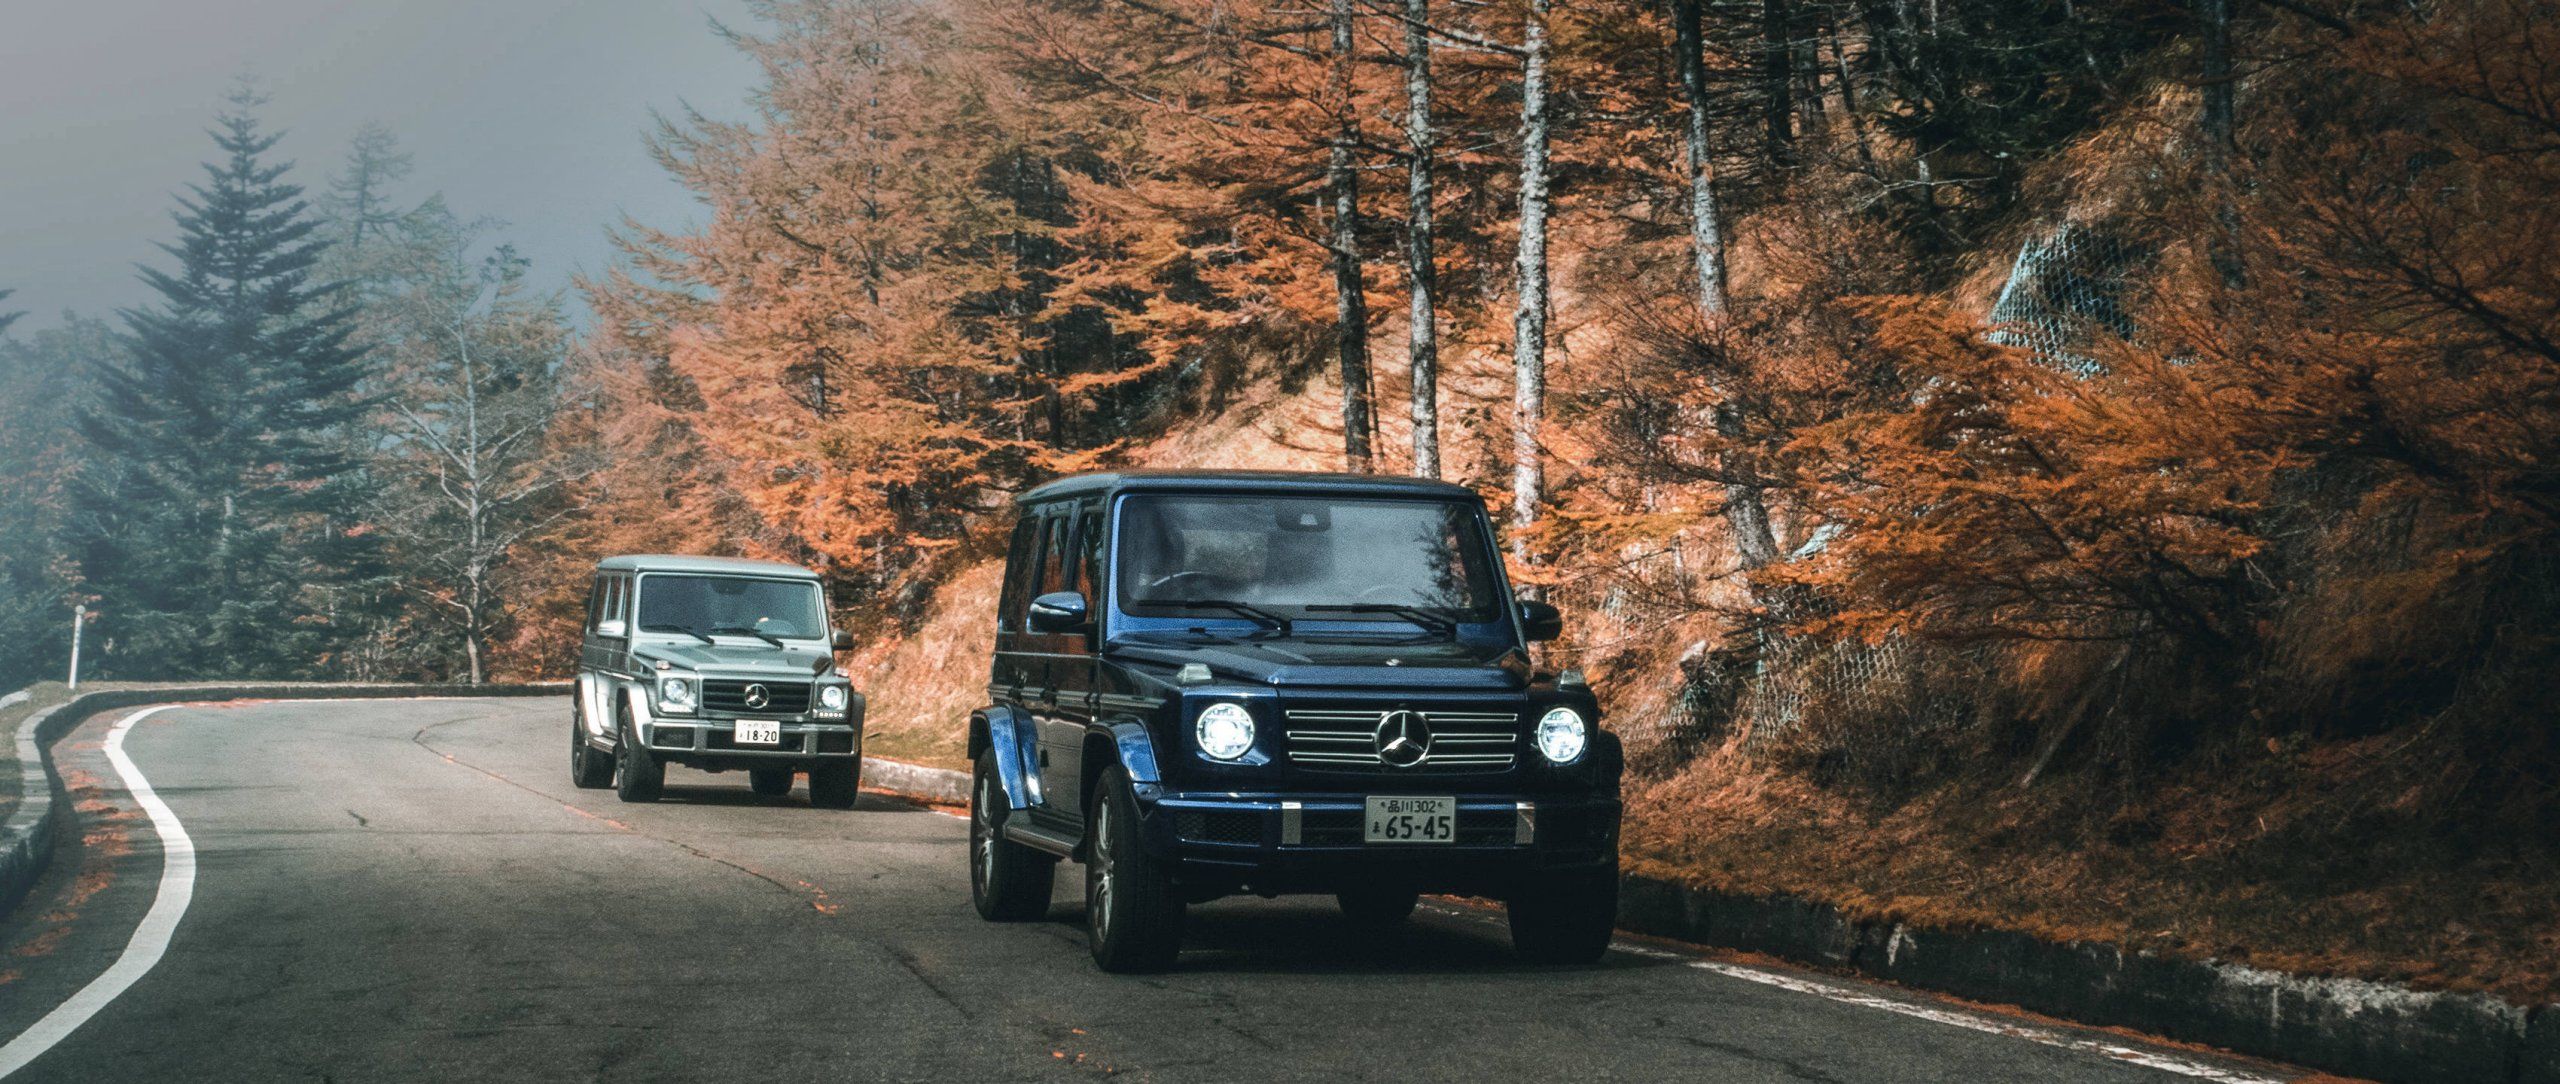 The Mercedes Benz G Class In The Land Of Contrasts: Japan